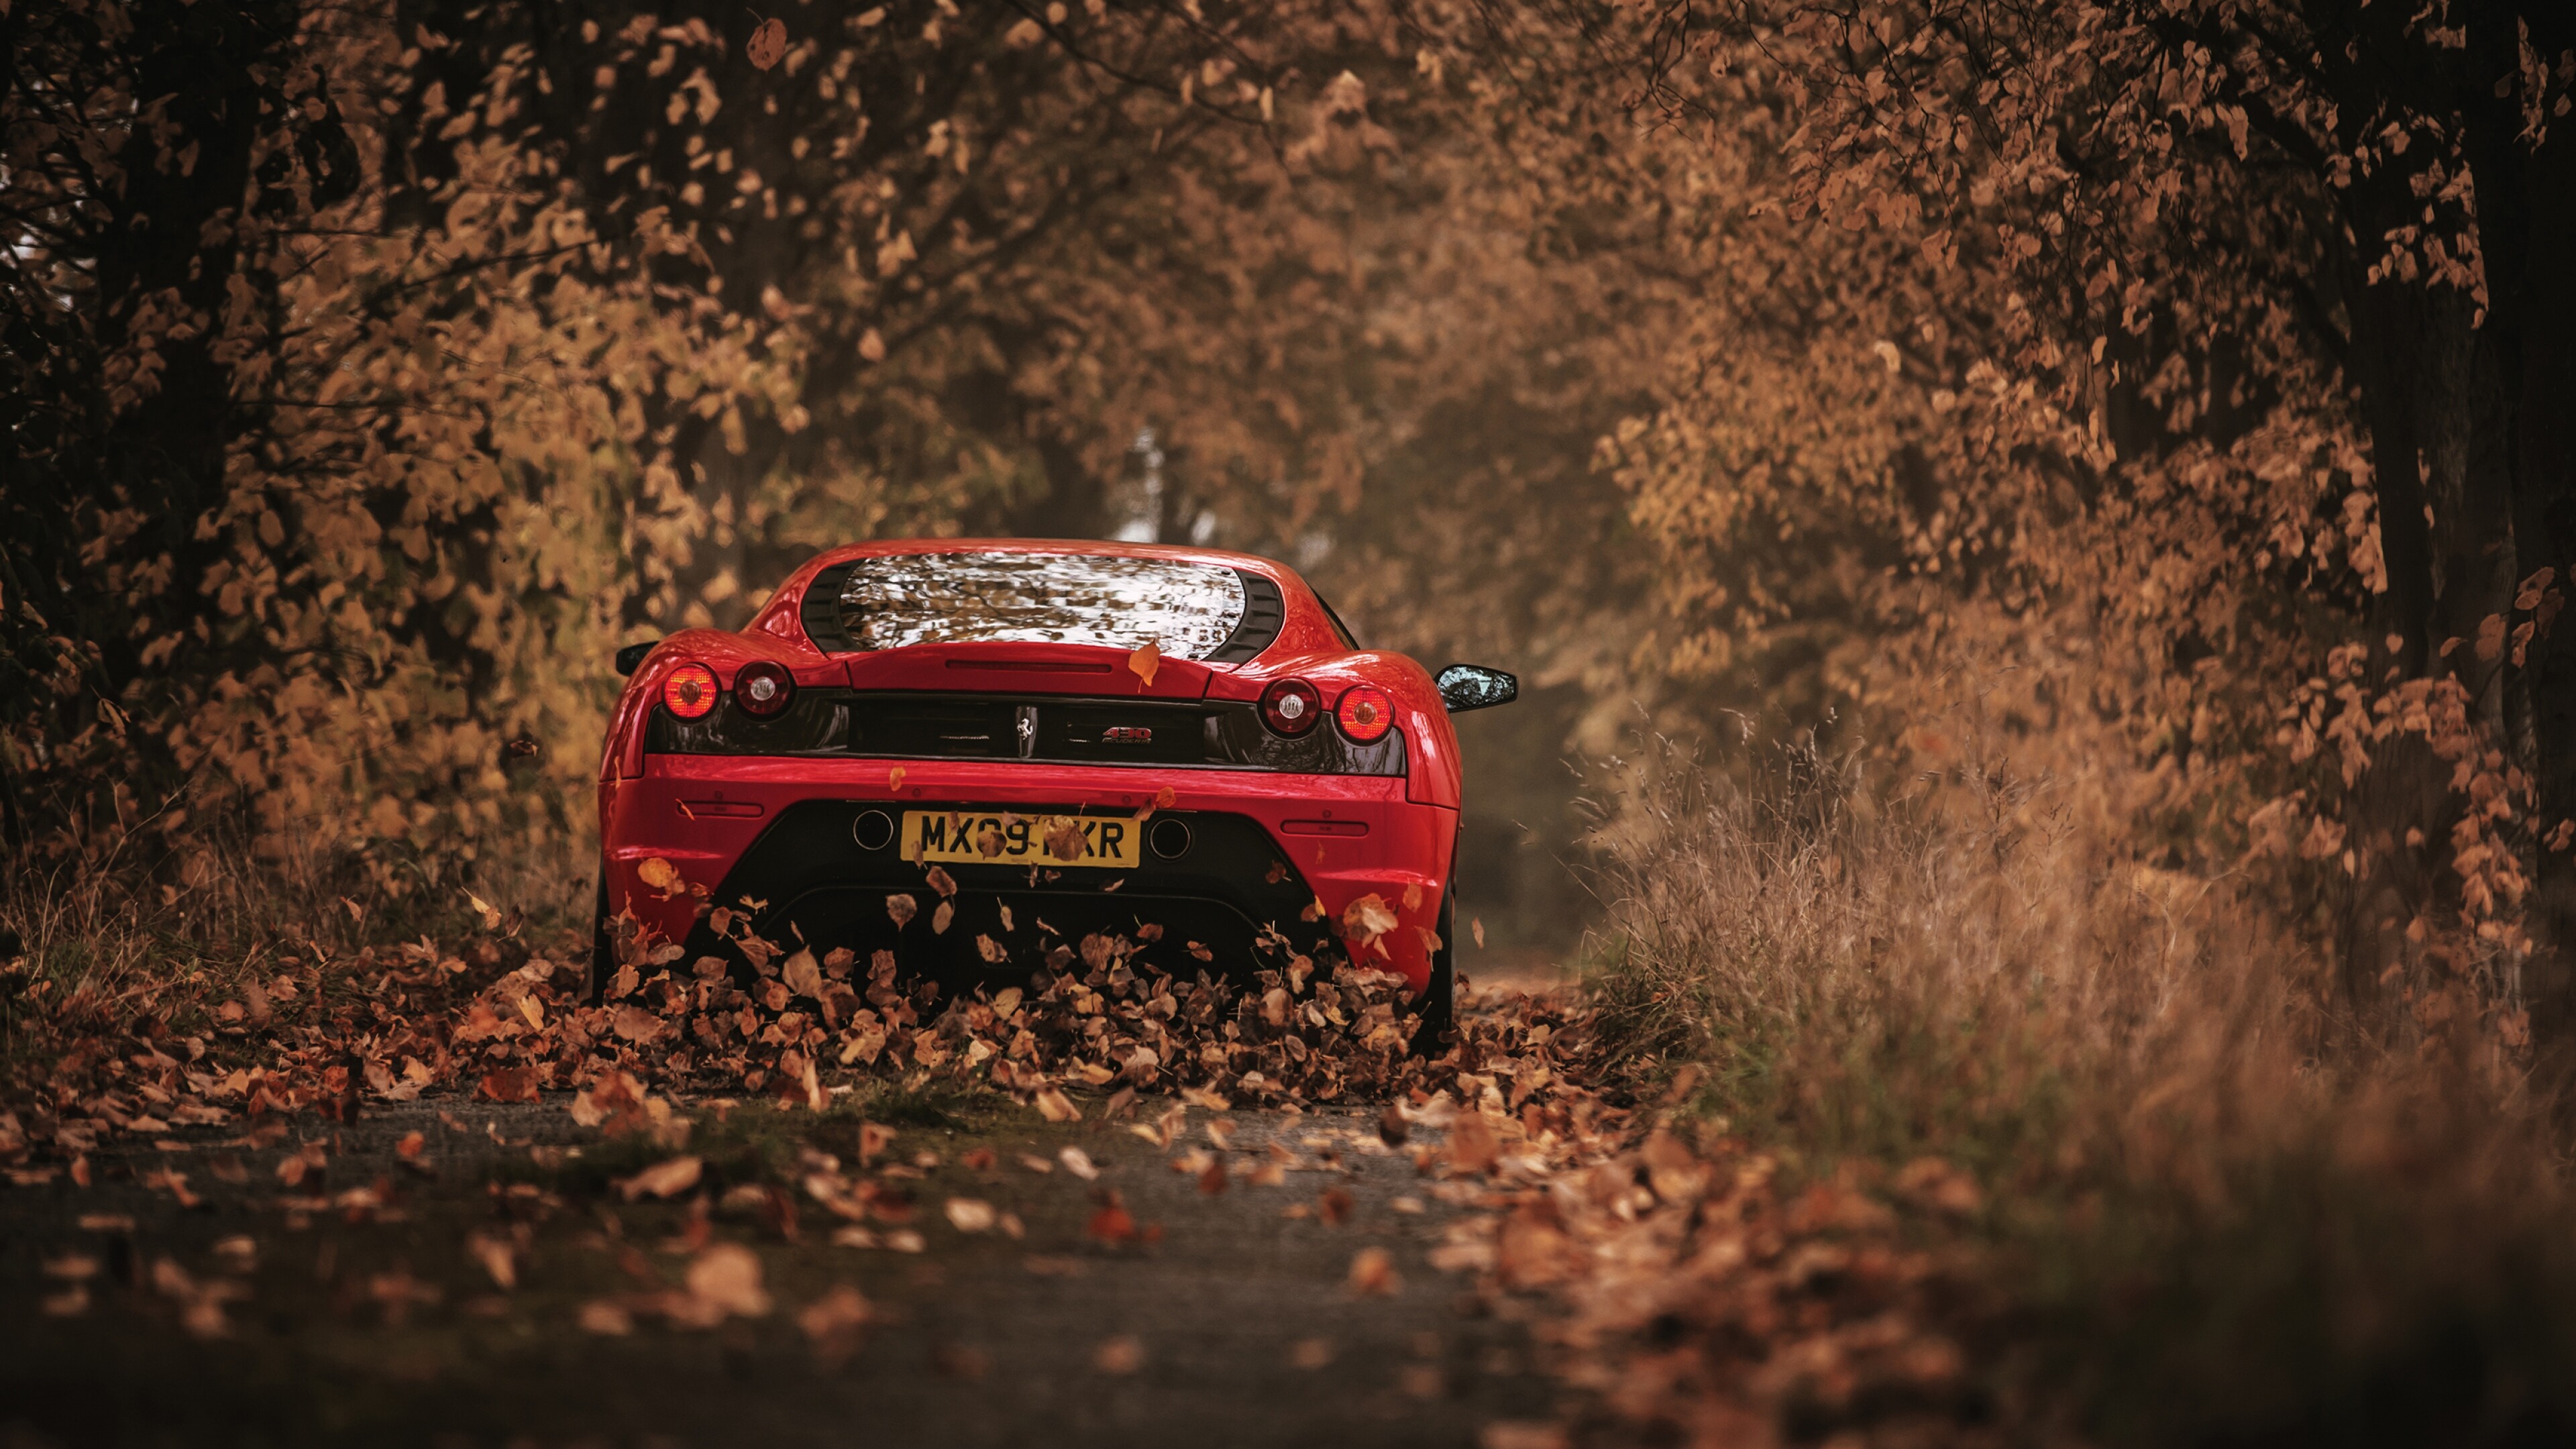 Ferrari: F430, A sports car produced by the Italian automobile manufacturer from 2004 to 2009. 3840x2160 4K Wallpaper.